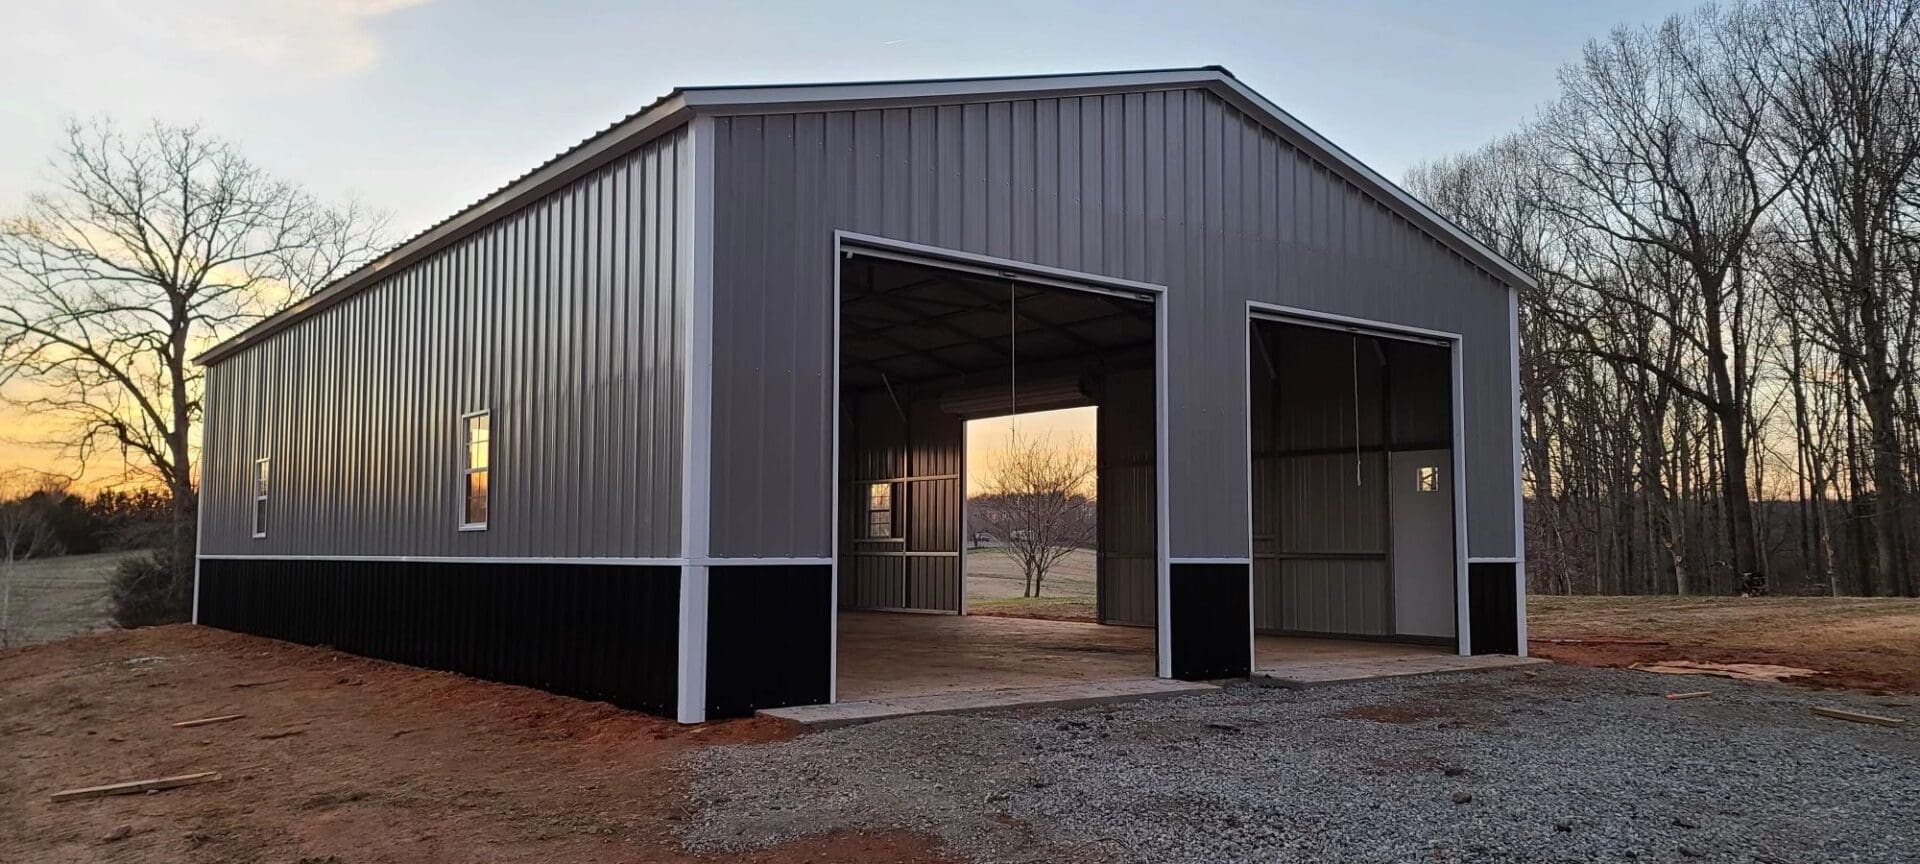 A large metal building with two doors and a door open.